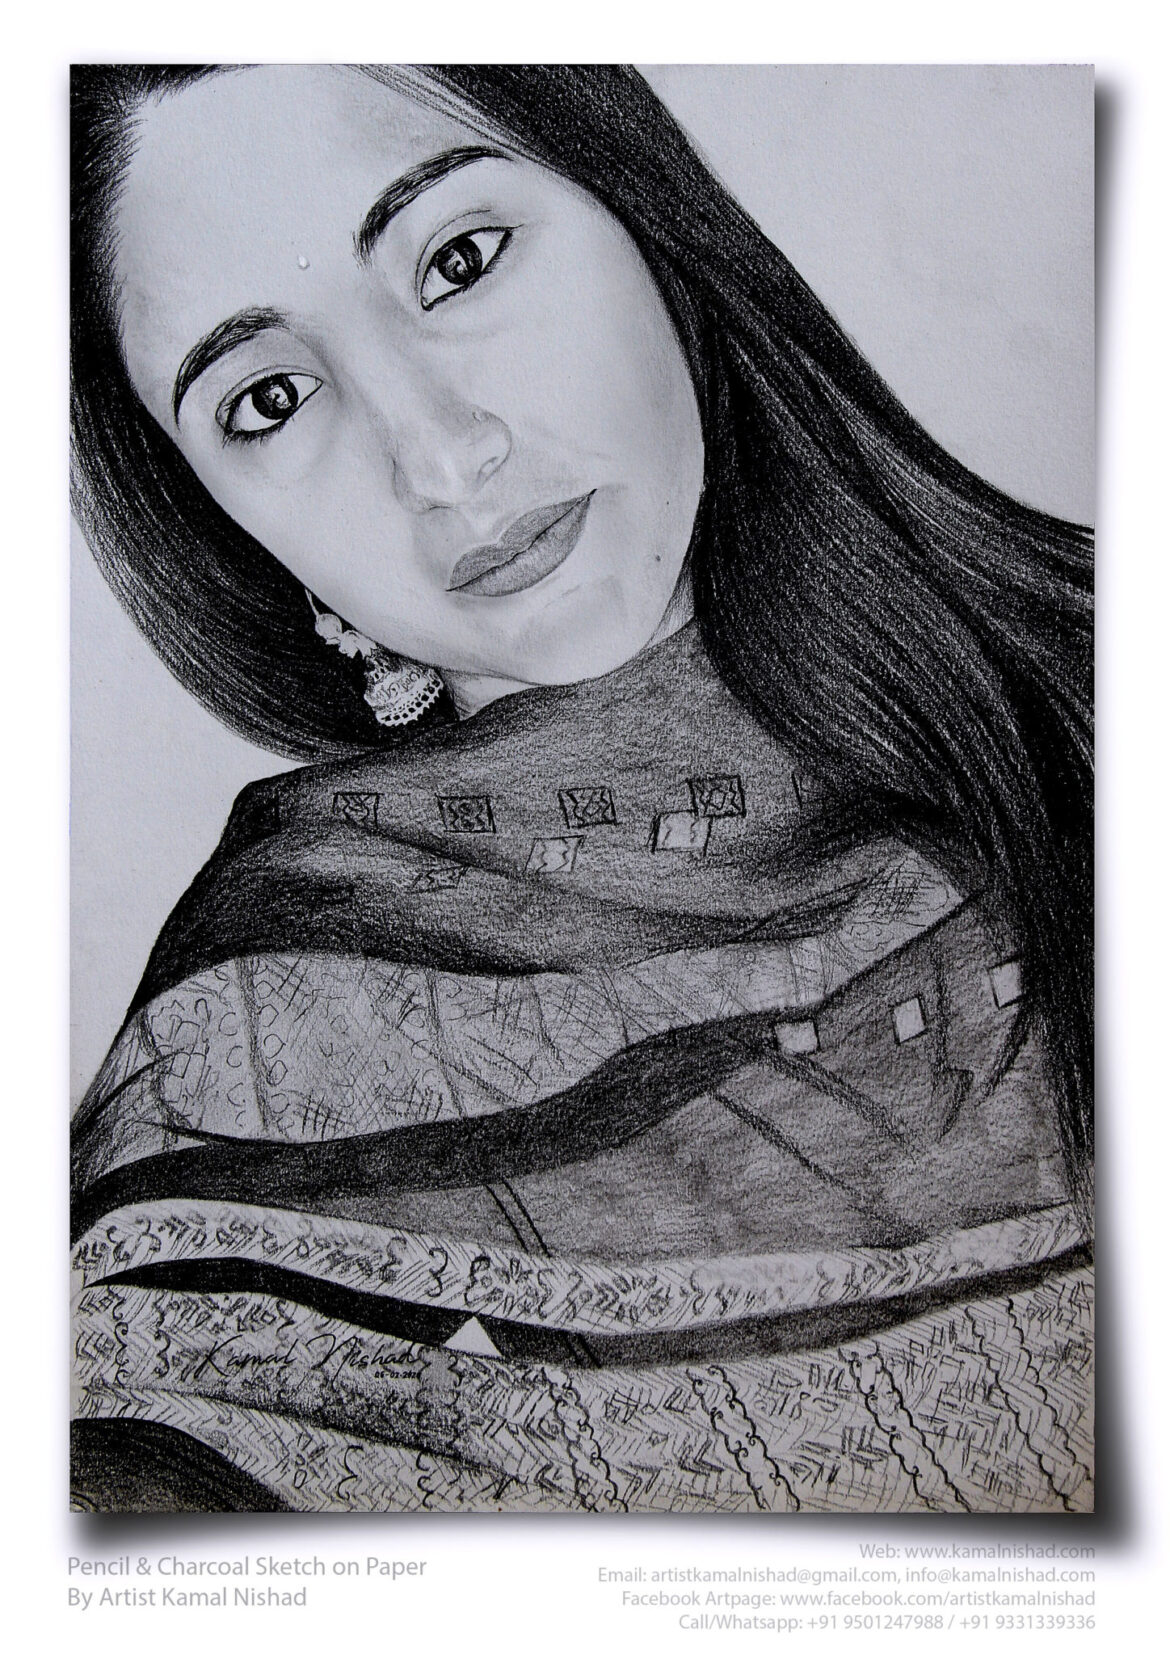 THE INNOCENCE BEAUTY | Pencil & Charcoal Sketch This is a Handmade/hand-drawn Sketch made with Pencil & Charcoal “THE INNOCENCE BEAUTY”. One of my client/customer wanted me to draw this portrait for a birthday gift. SIZE: A3 Created by © Kamal Nishad. All rights reserved.